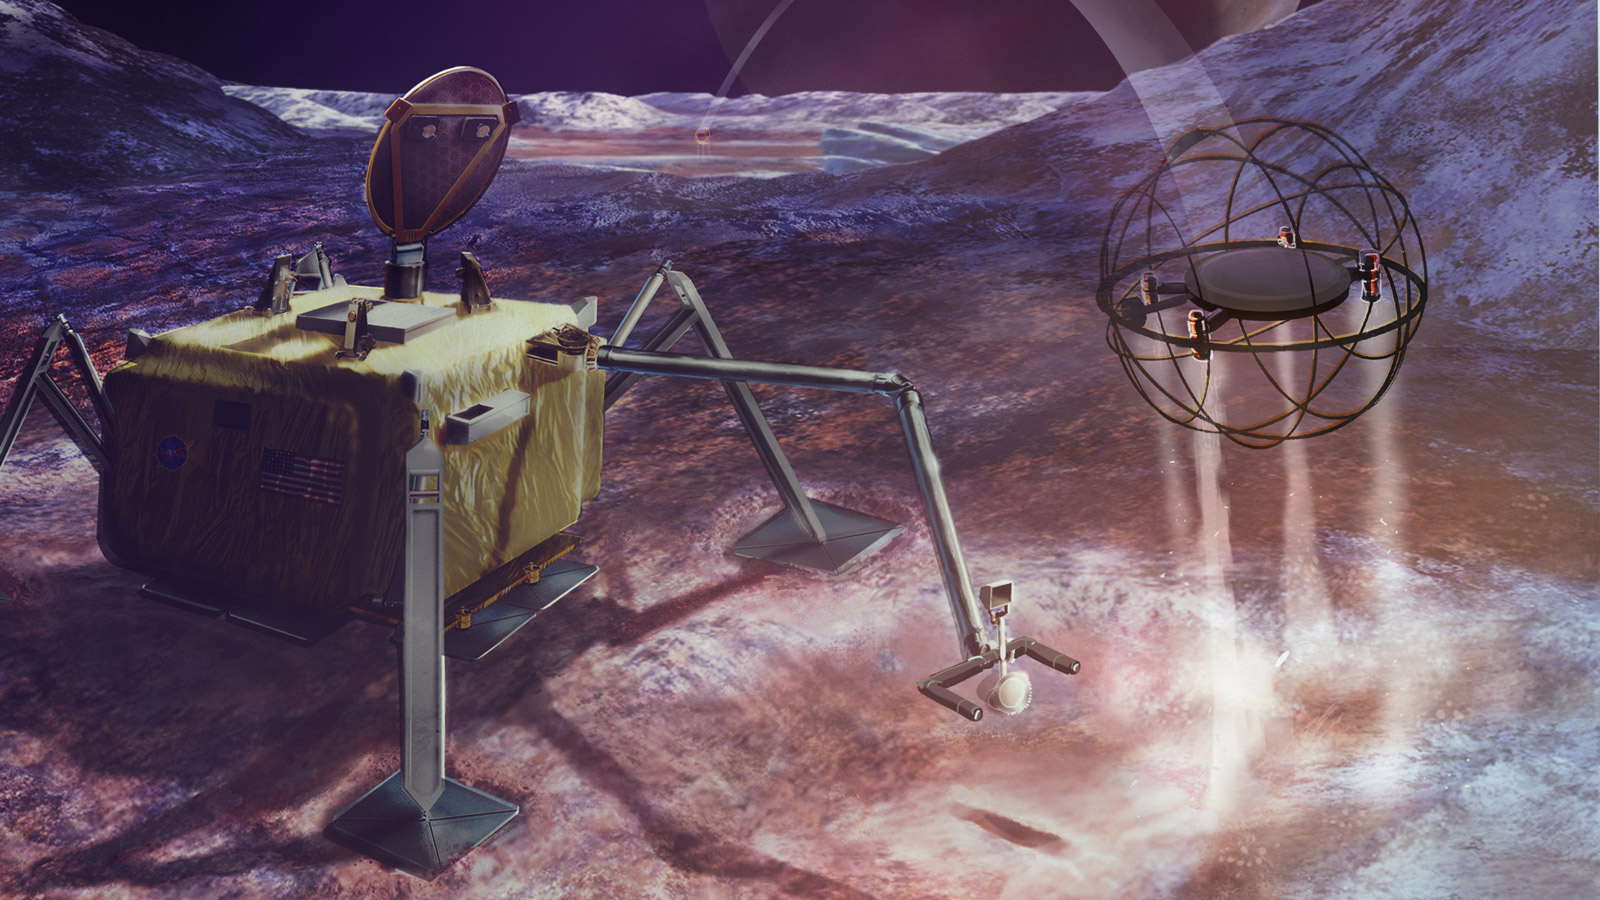 In this artist's concept, a SPARROW robot uses steam propulsion to hop away from its lander